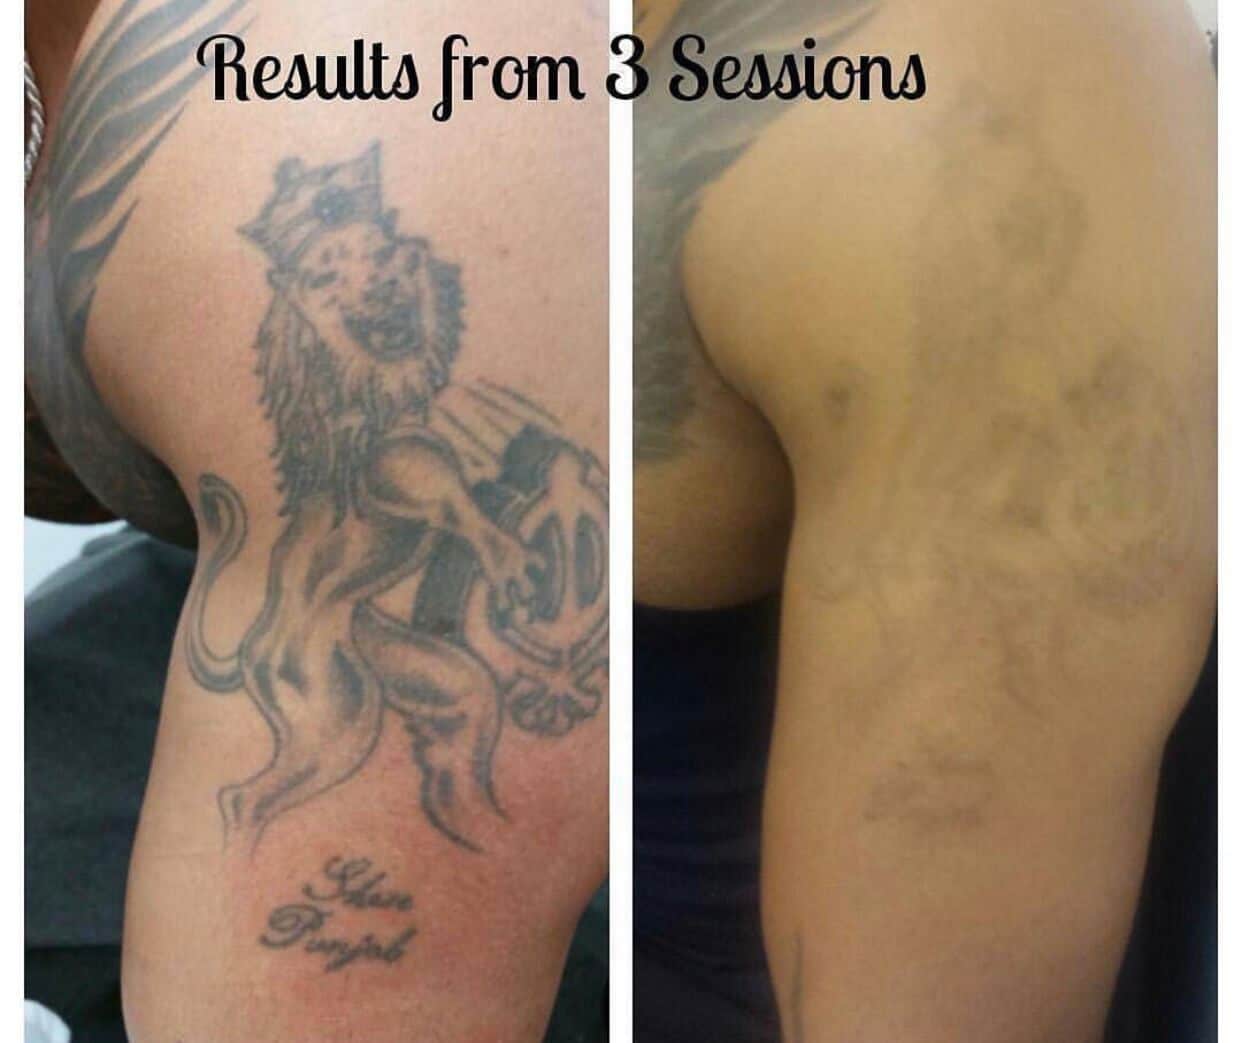 Scar From Tattoo Removal : 7 Tips After Laser Tattoo Removal Treatment ...